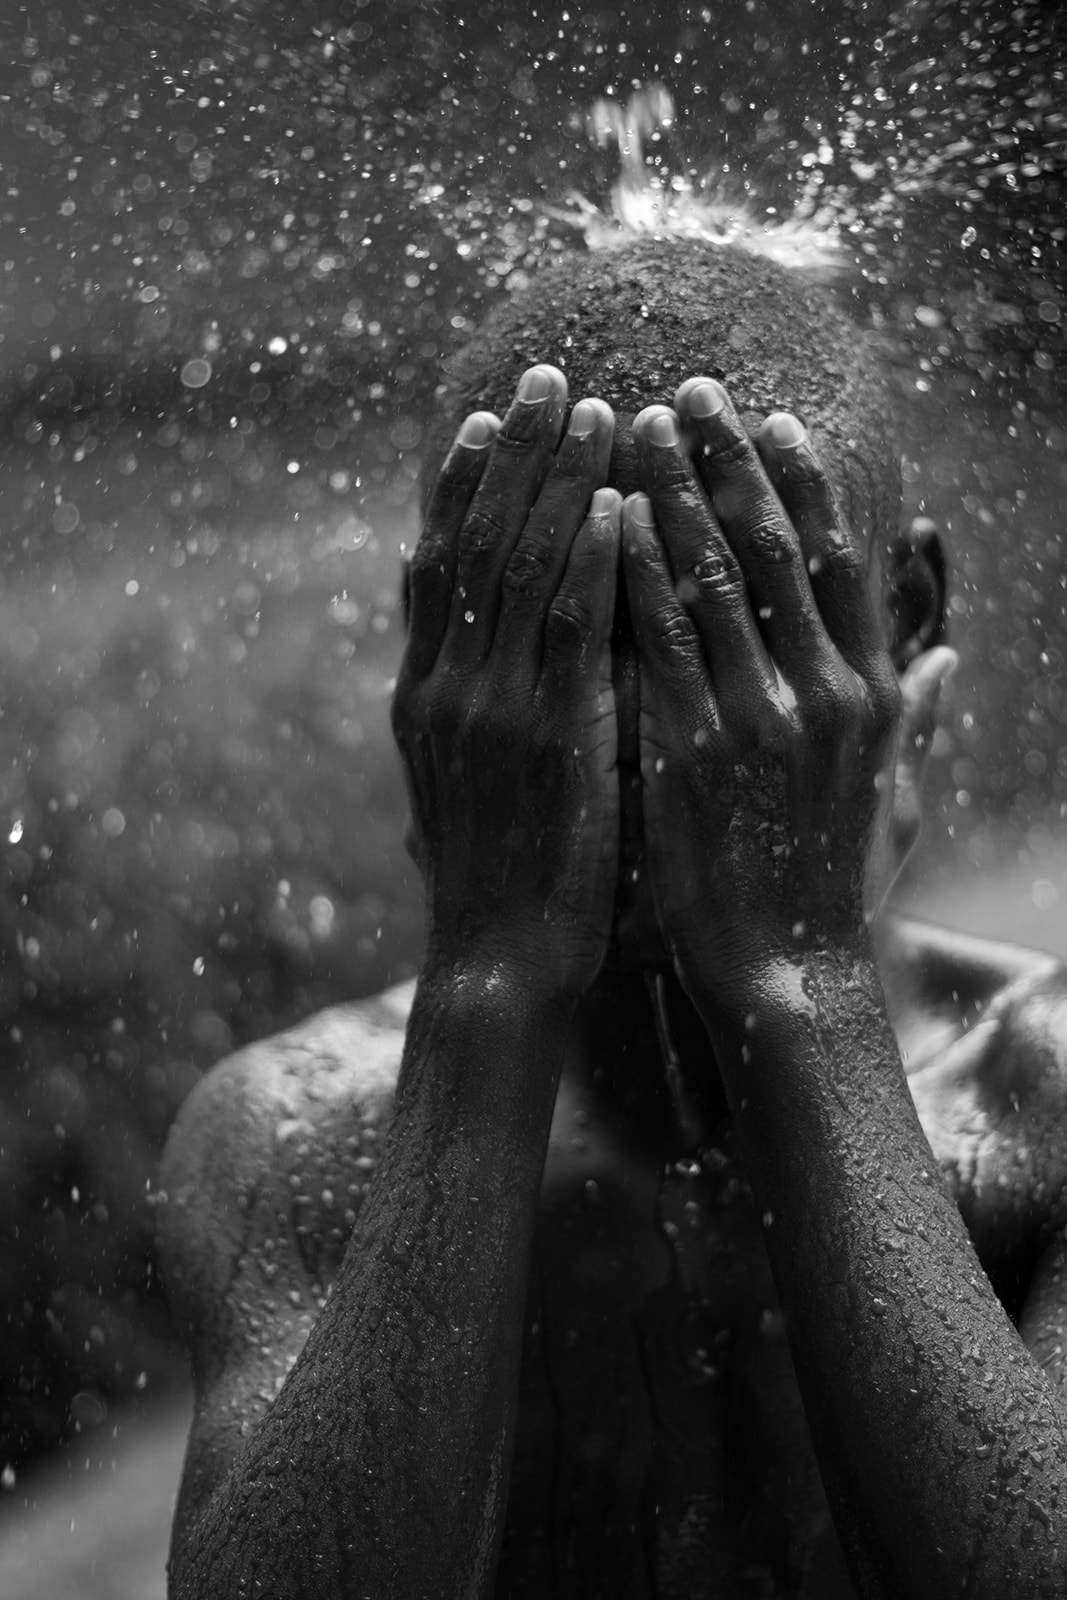 A Haitian boy covers his face with his hands in the rain in Port-au-Prince, Haiti